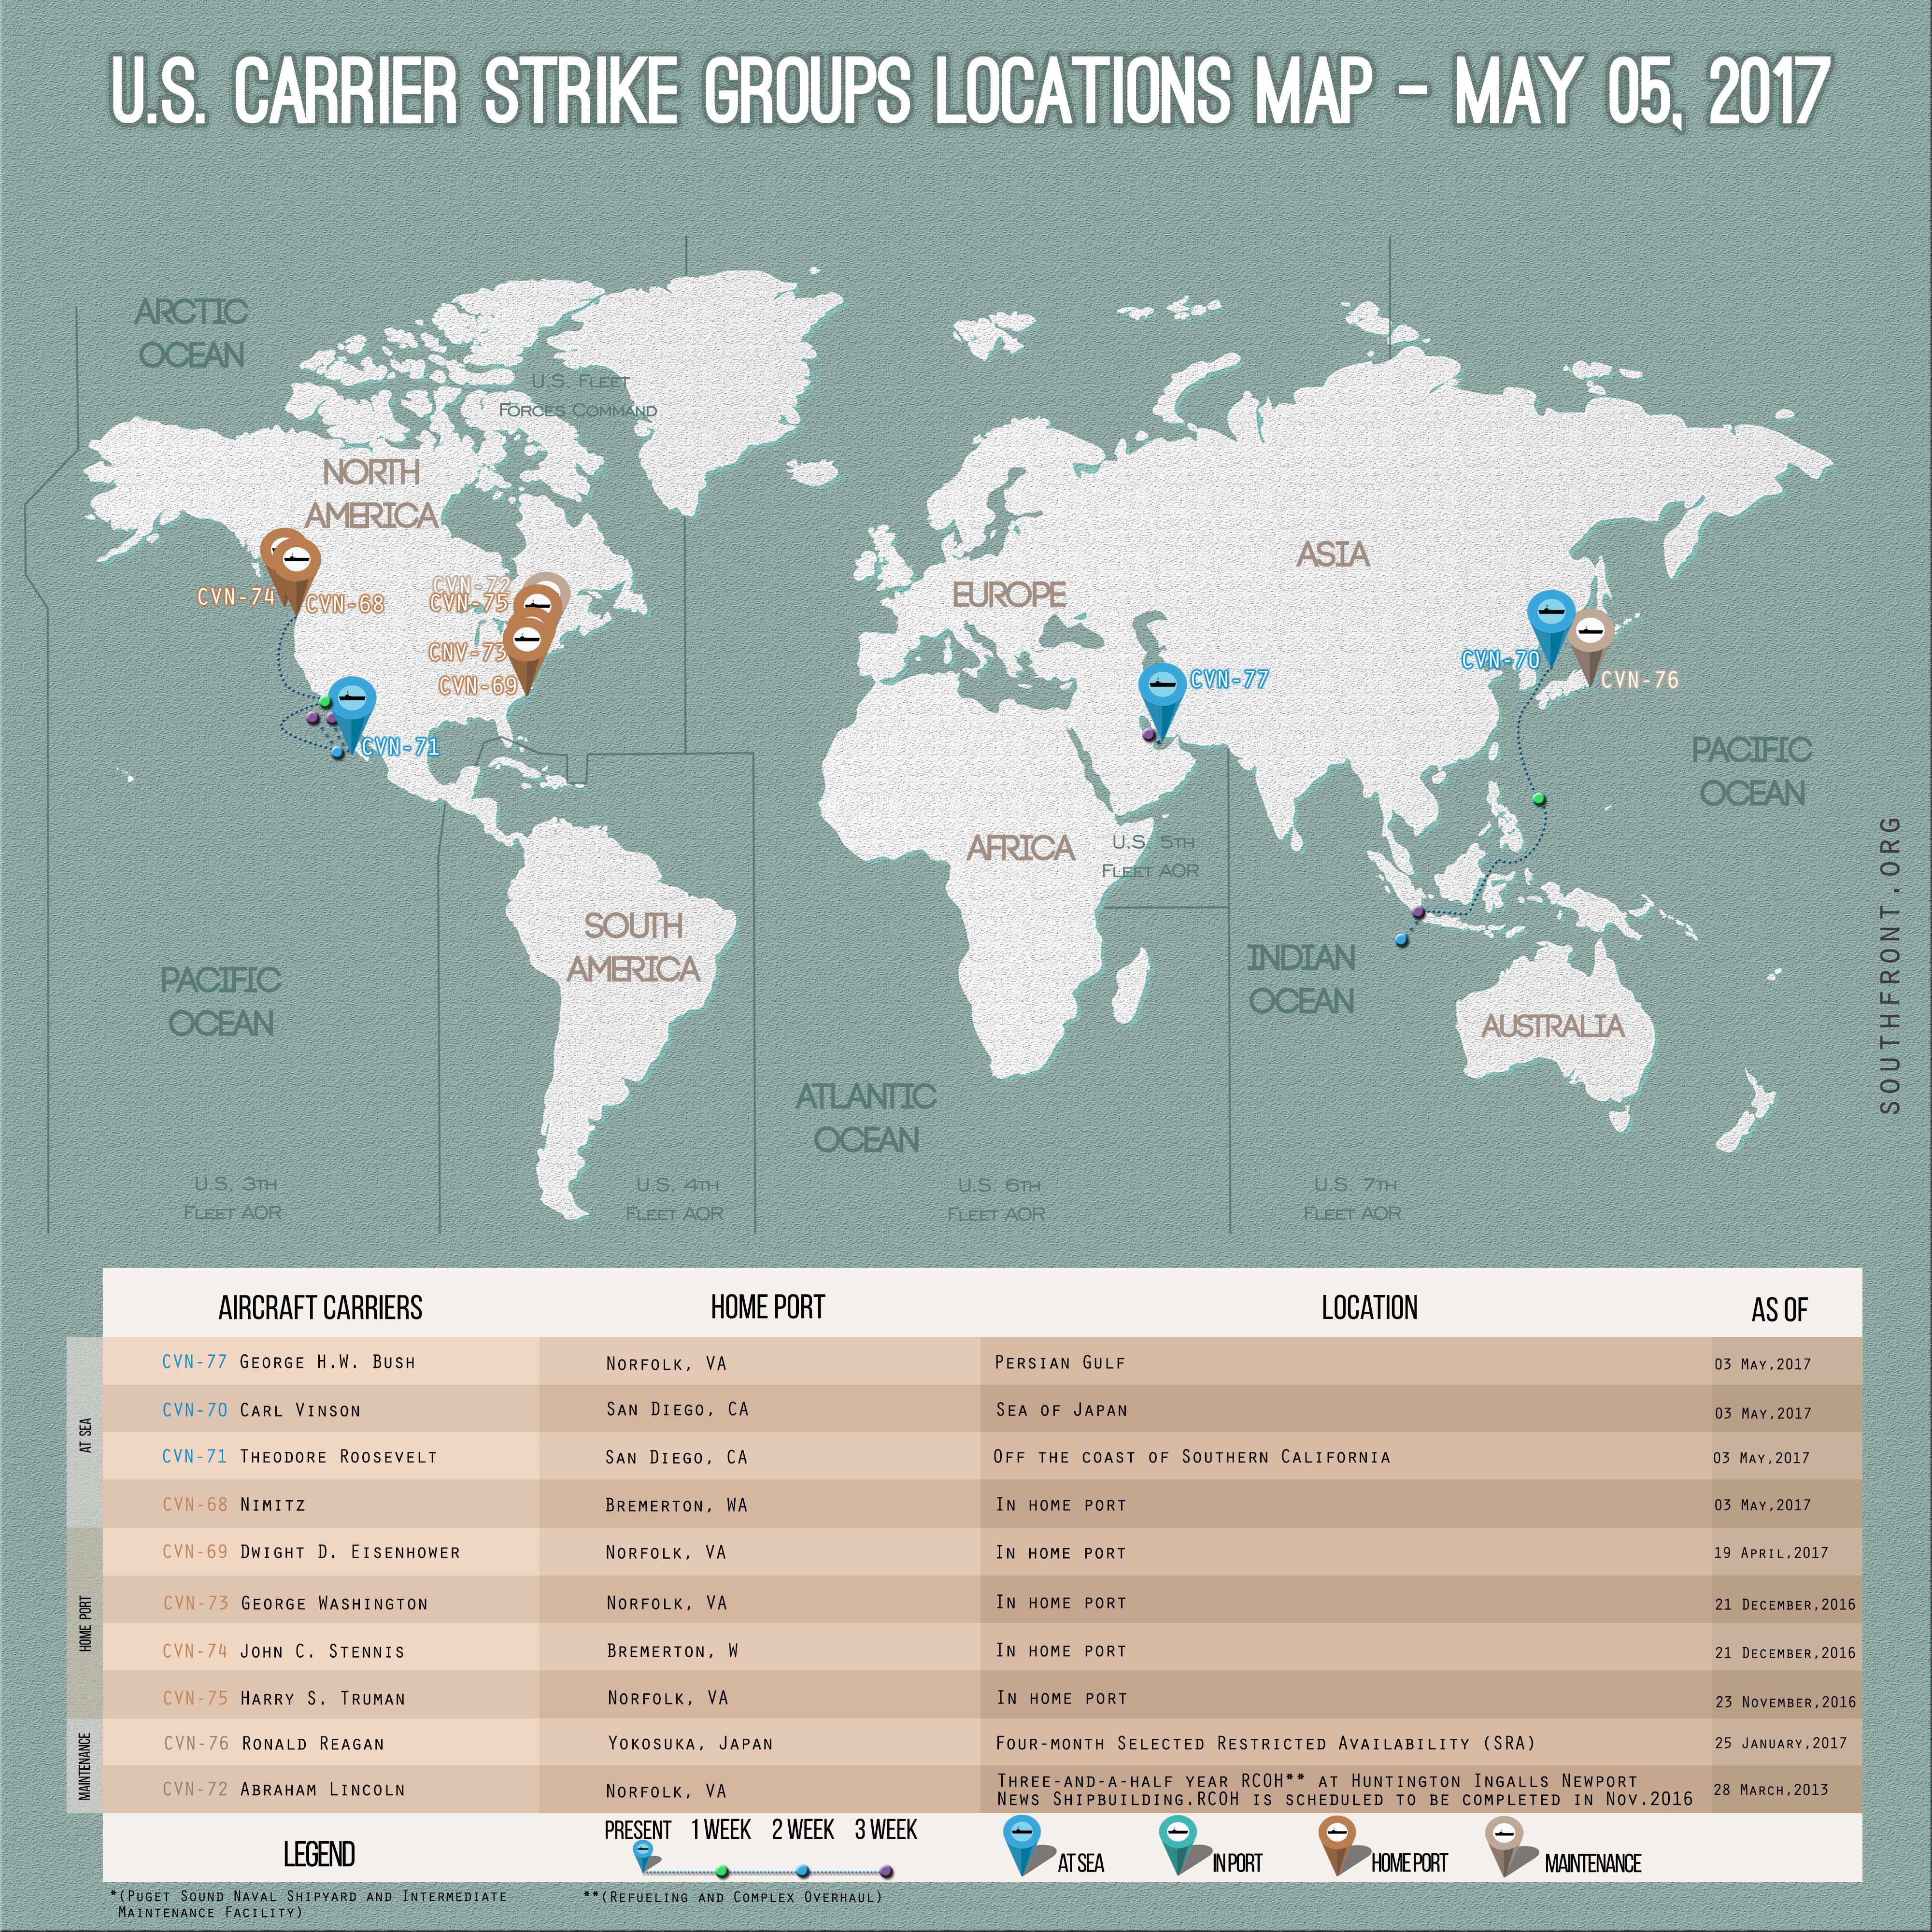 US Carrier Strike Groups Locations Map – May 5, 2017